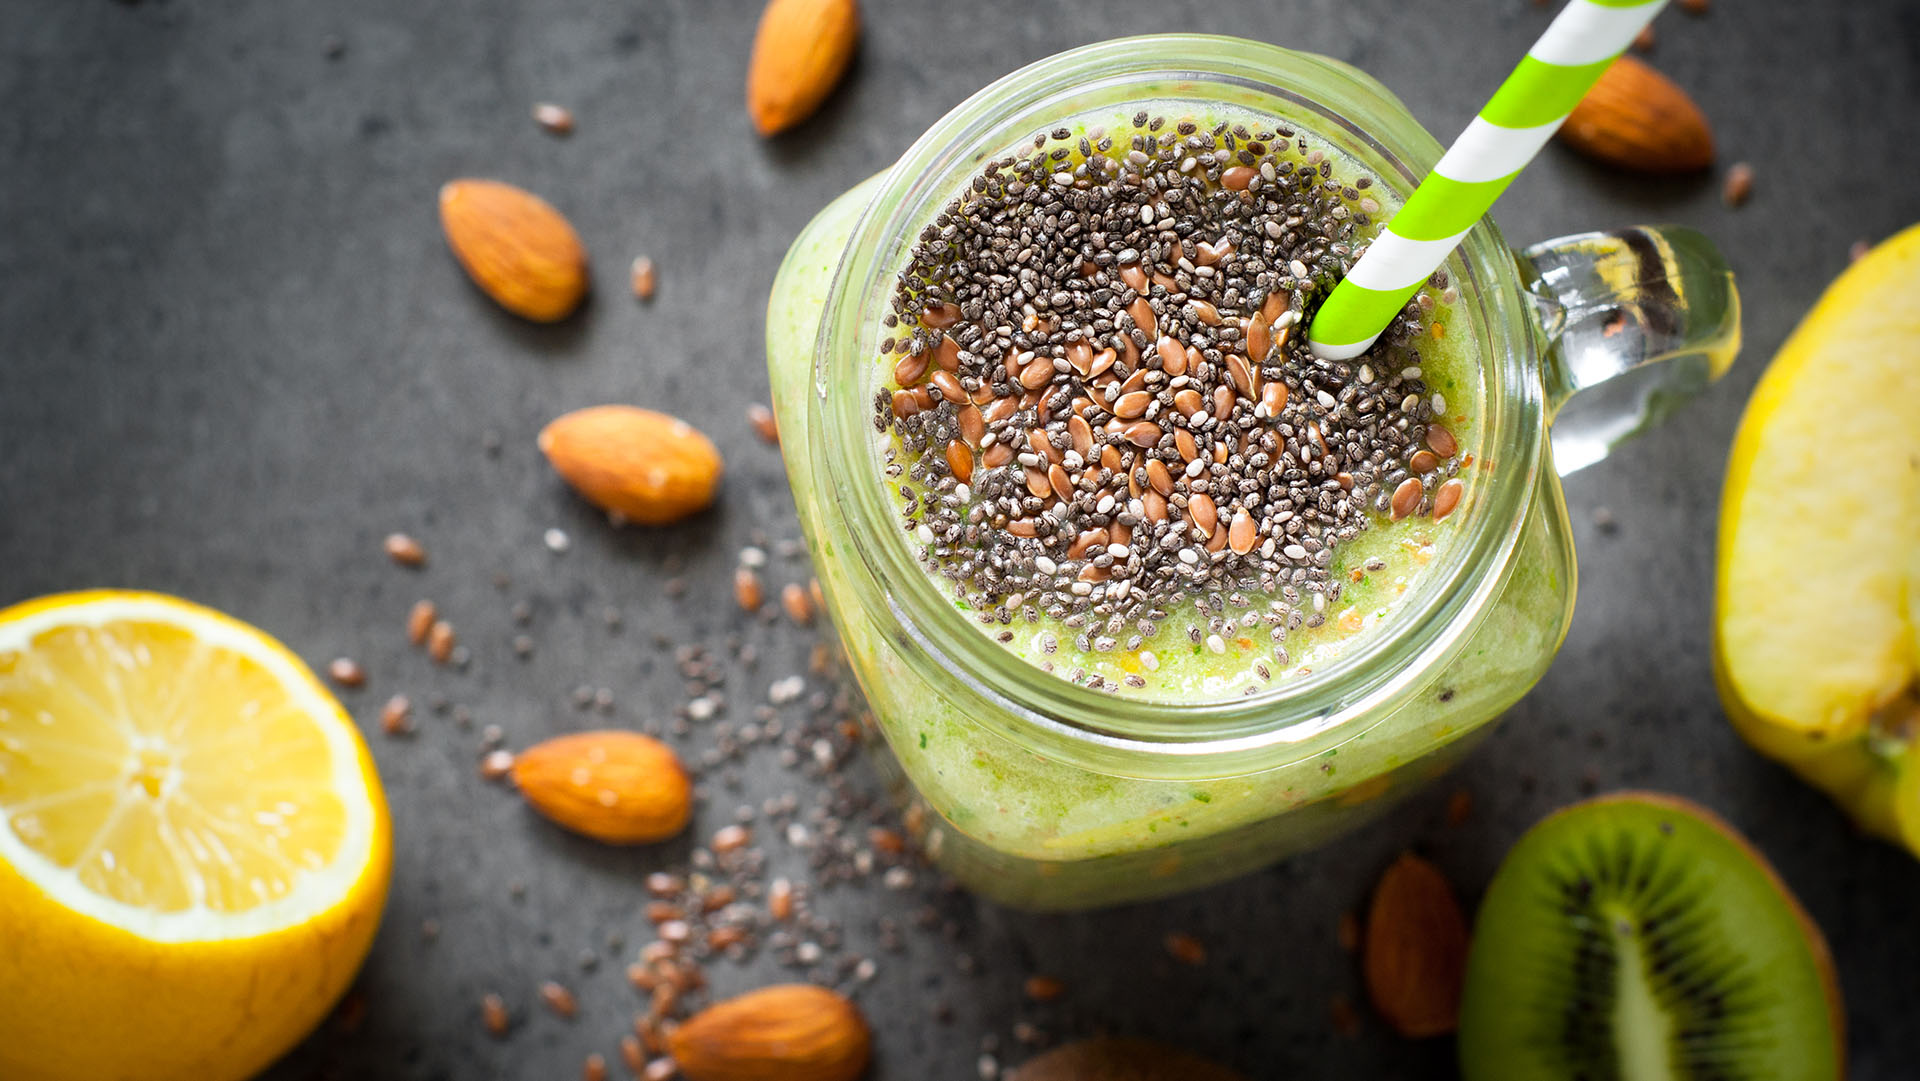 Green smoothie from fruit, leaves and seeds. A healthy eating and detox concept.